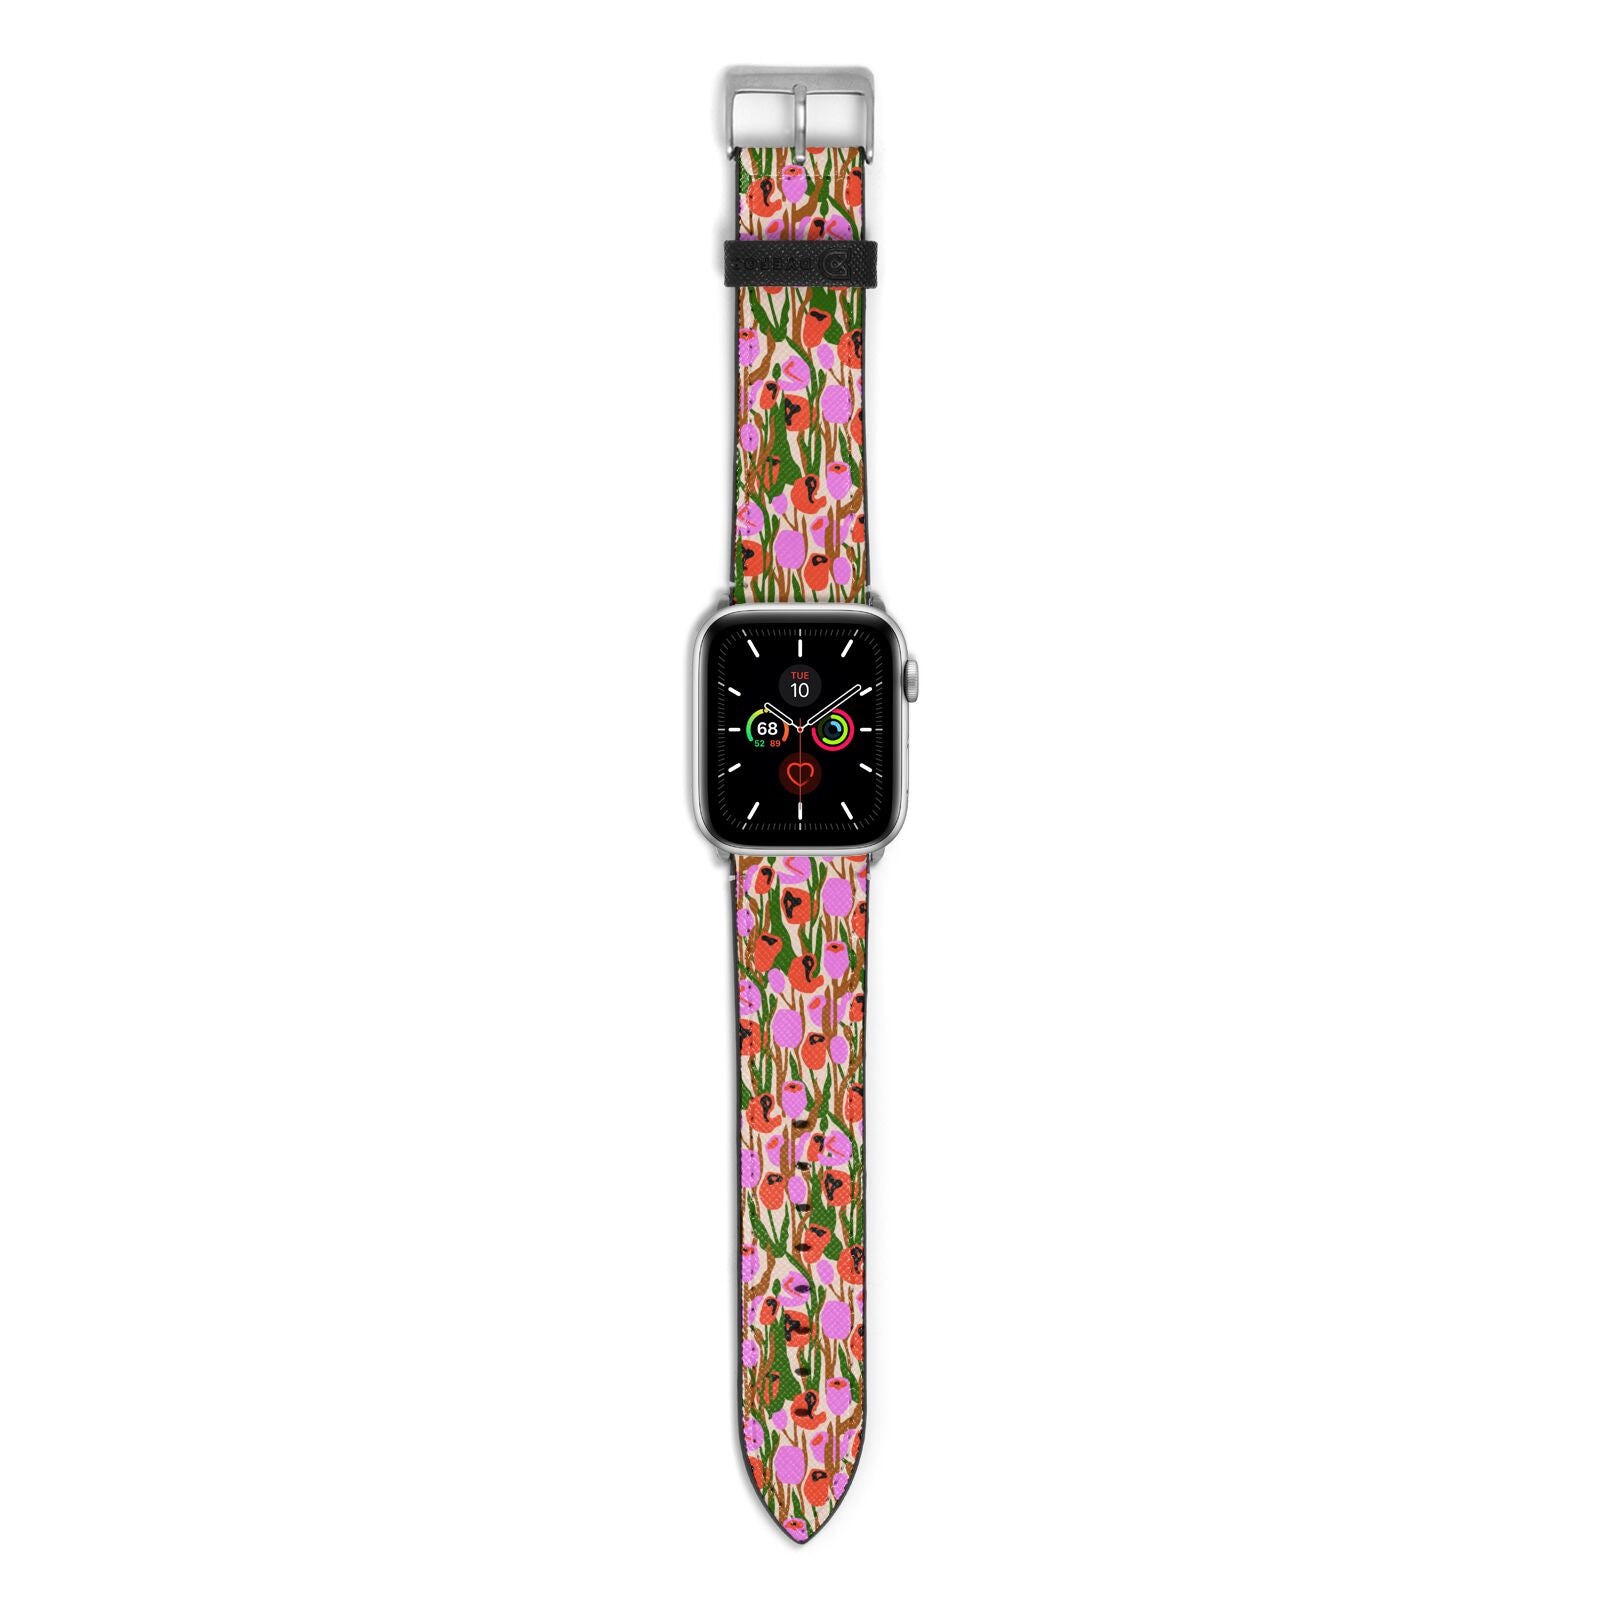 Floral Apple Watch Strap with Silver Hardware